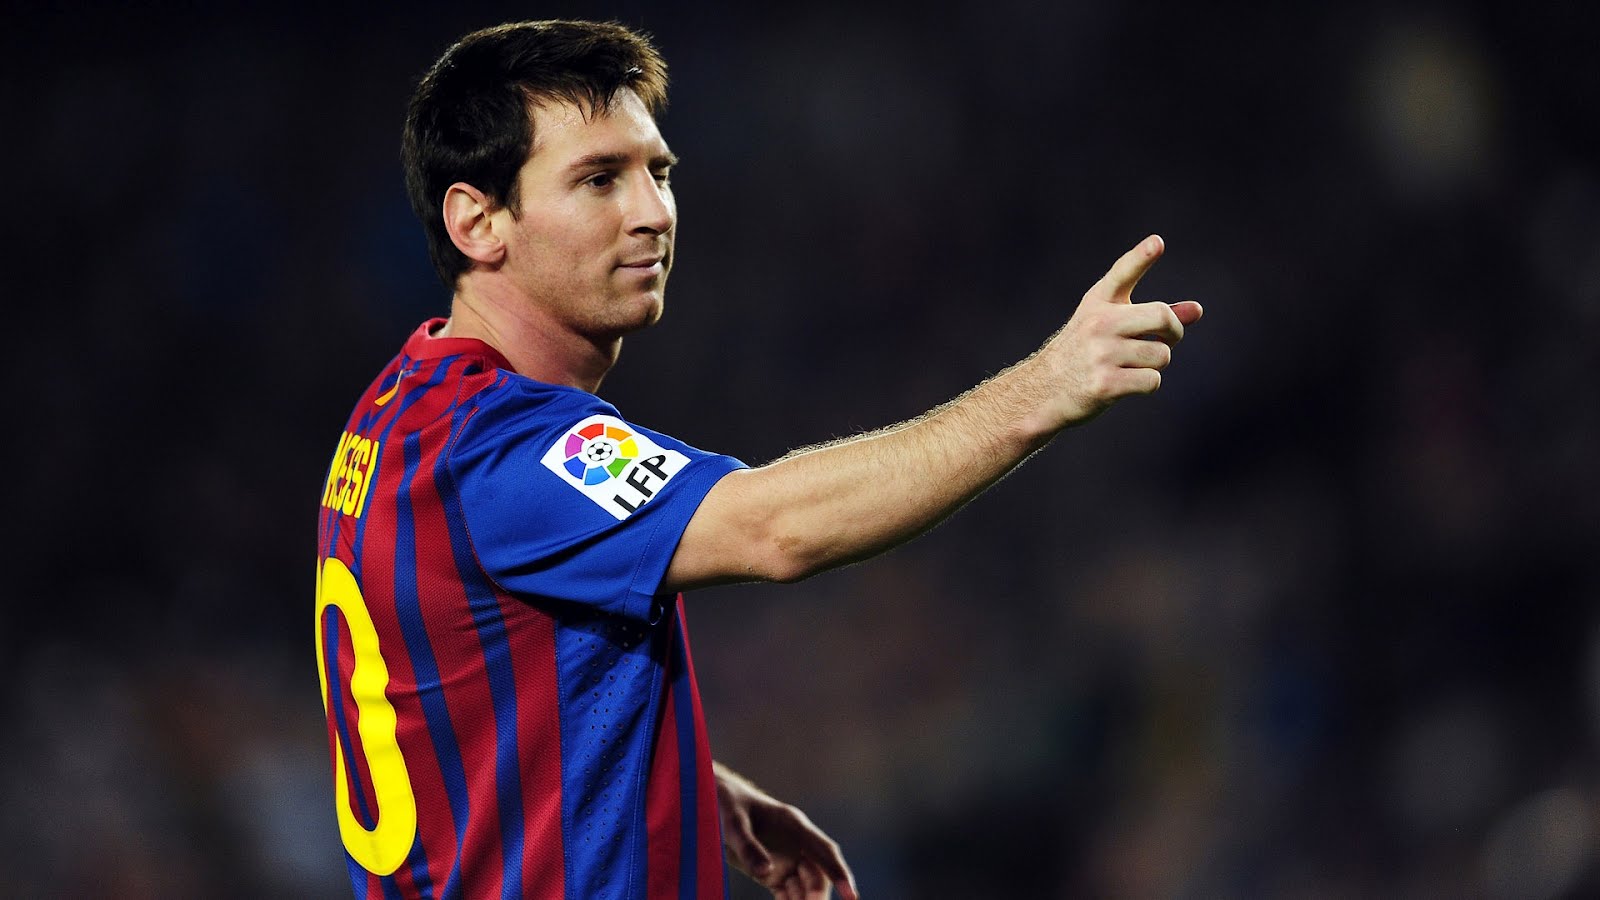 Lionel Messi Wallpaper 10 11120 Hd Wallpapers in Football   Imagesci